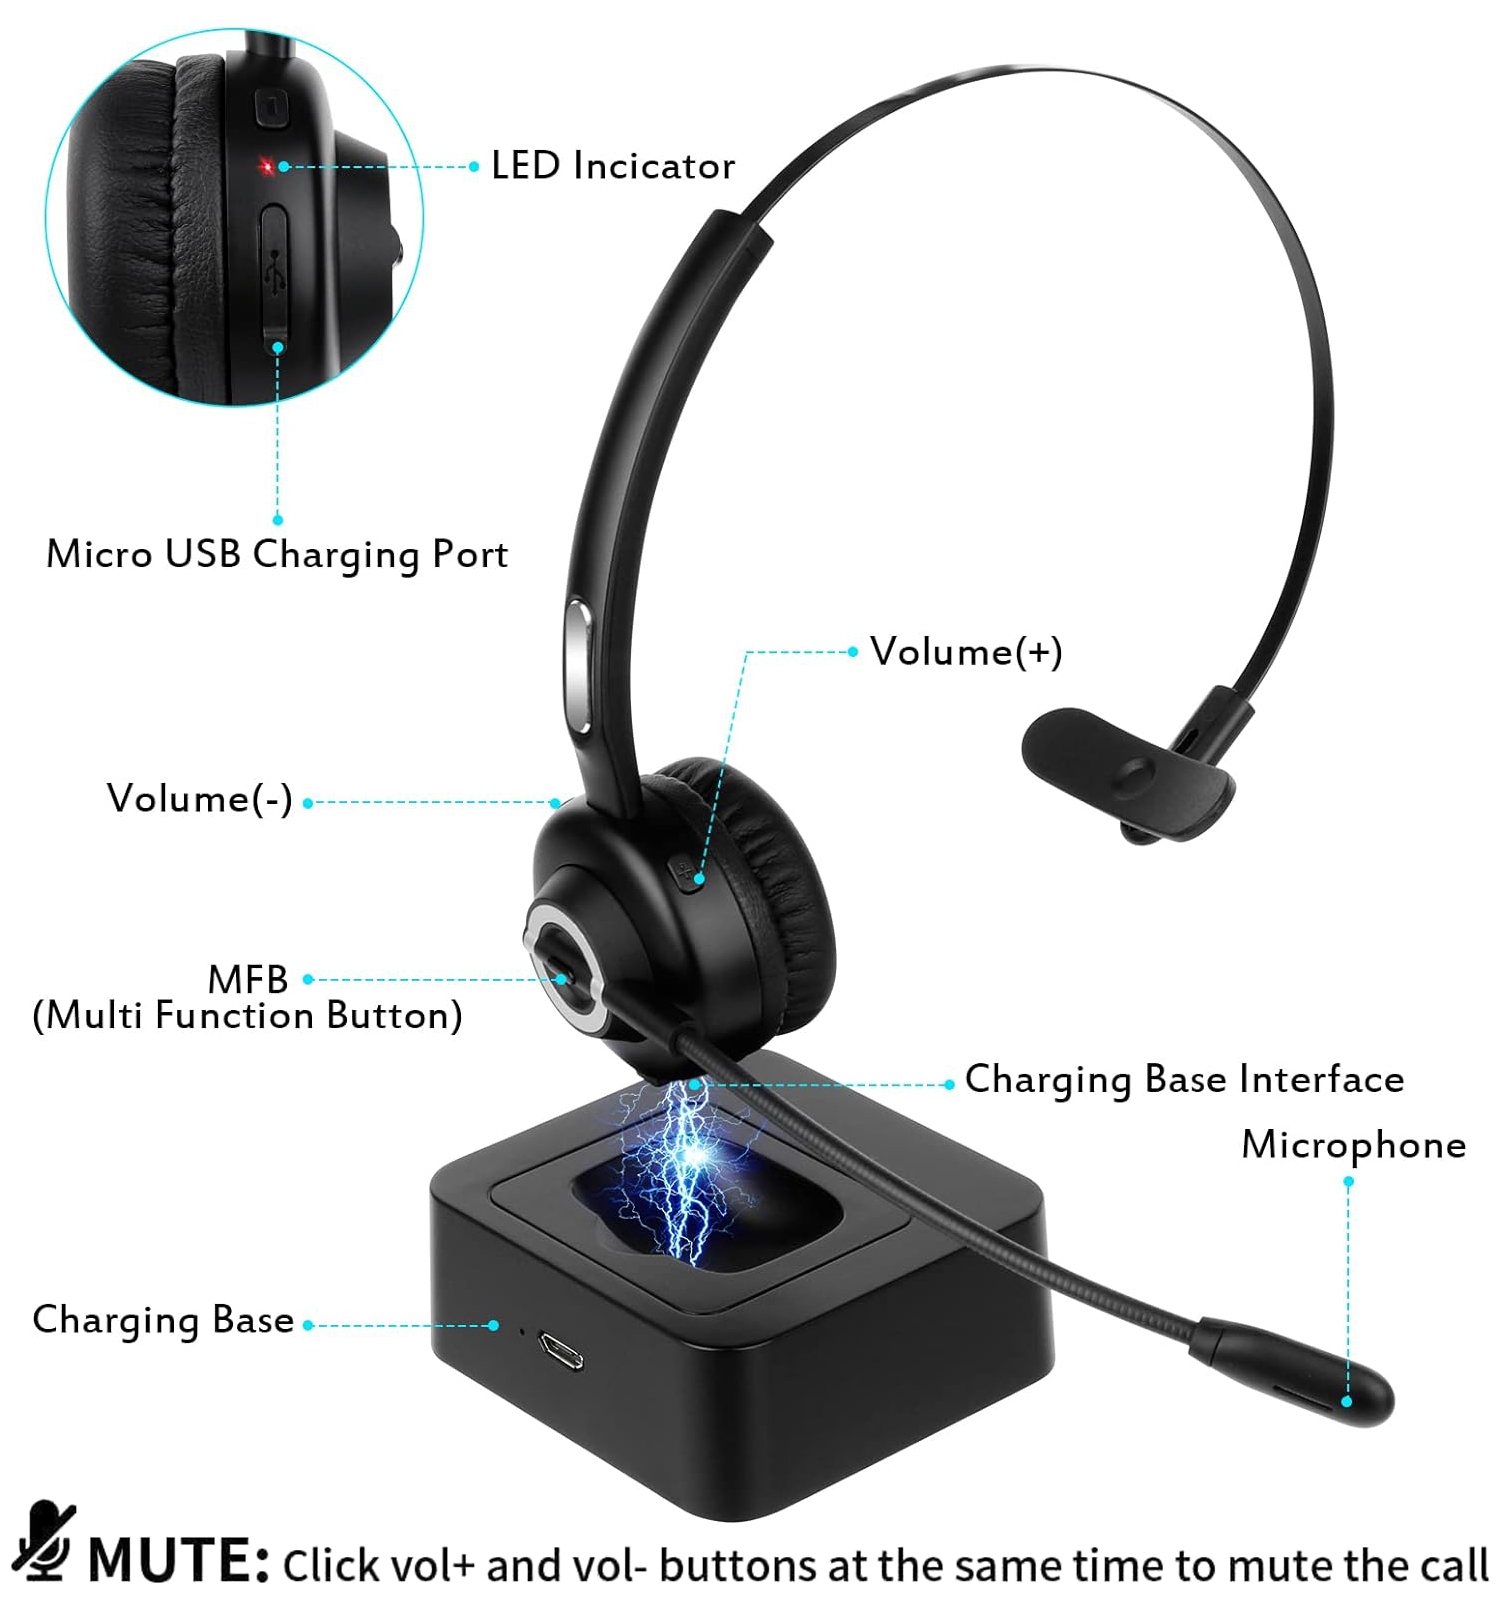 Headphones-Trucker-Bluetooth-Headset-V5-0-Bluetooth-Headset-with-Microphone-Noise-Canceling-18hr-Talktime-Wireless-Headset-with-Standing-Dock-Car-Bluetooth-29